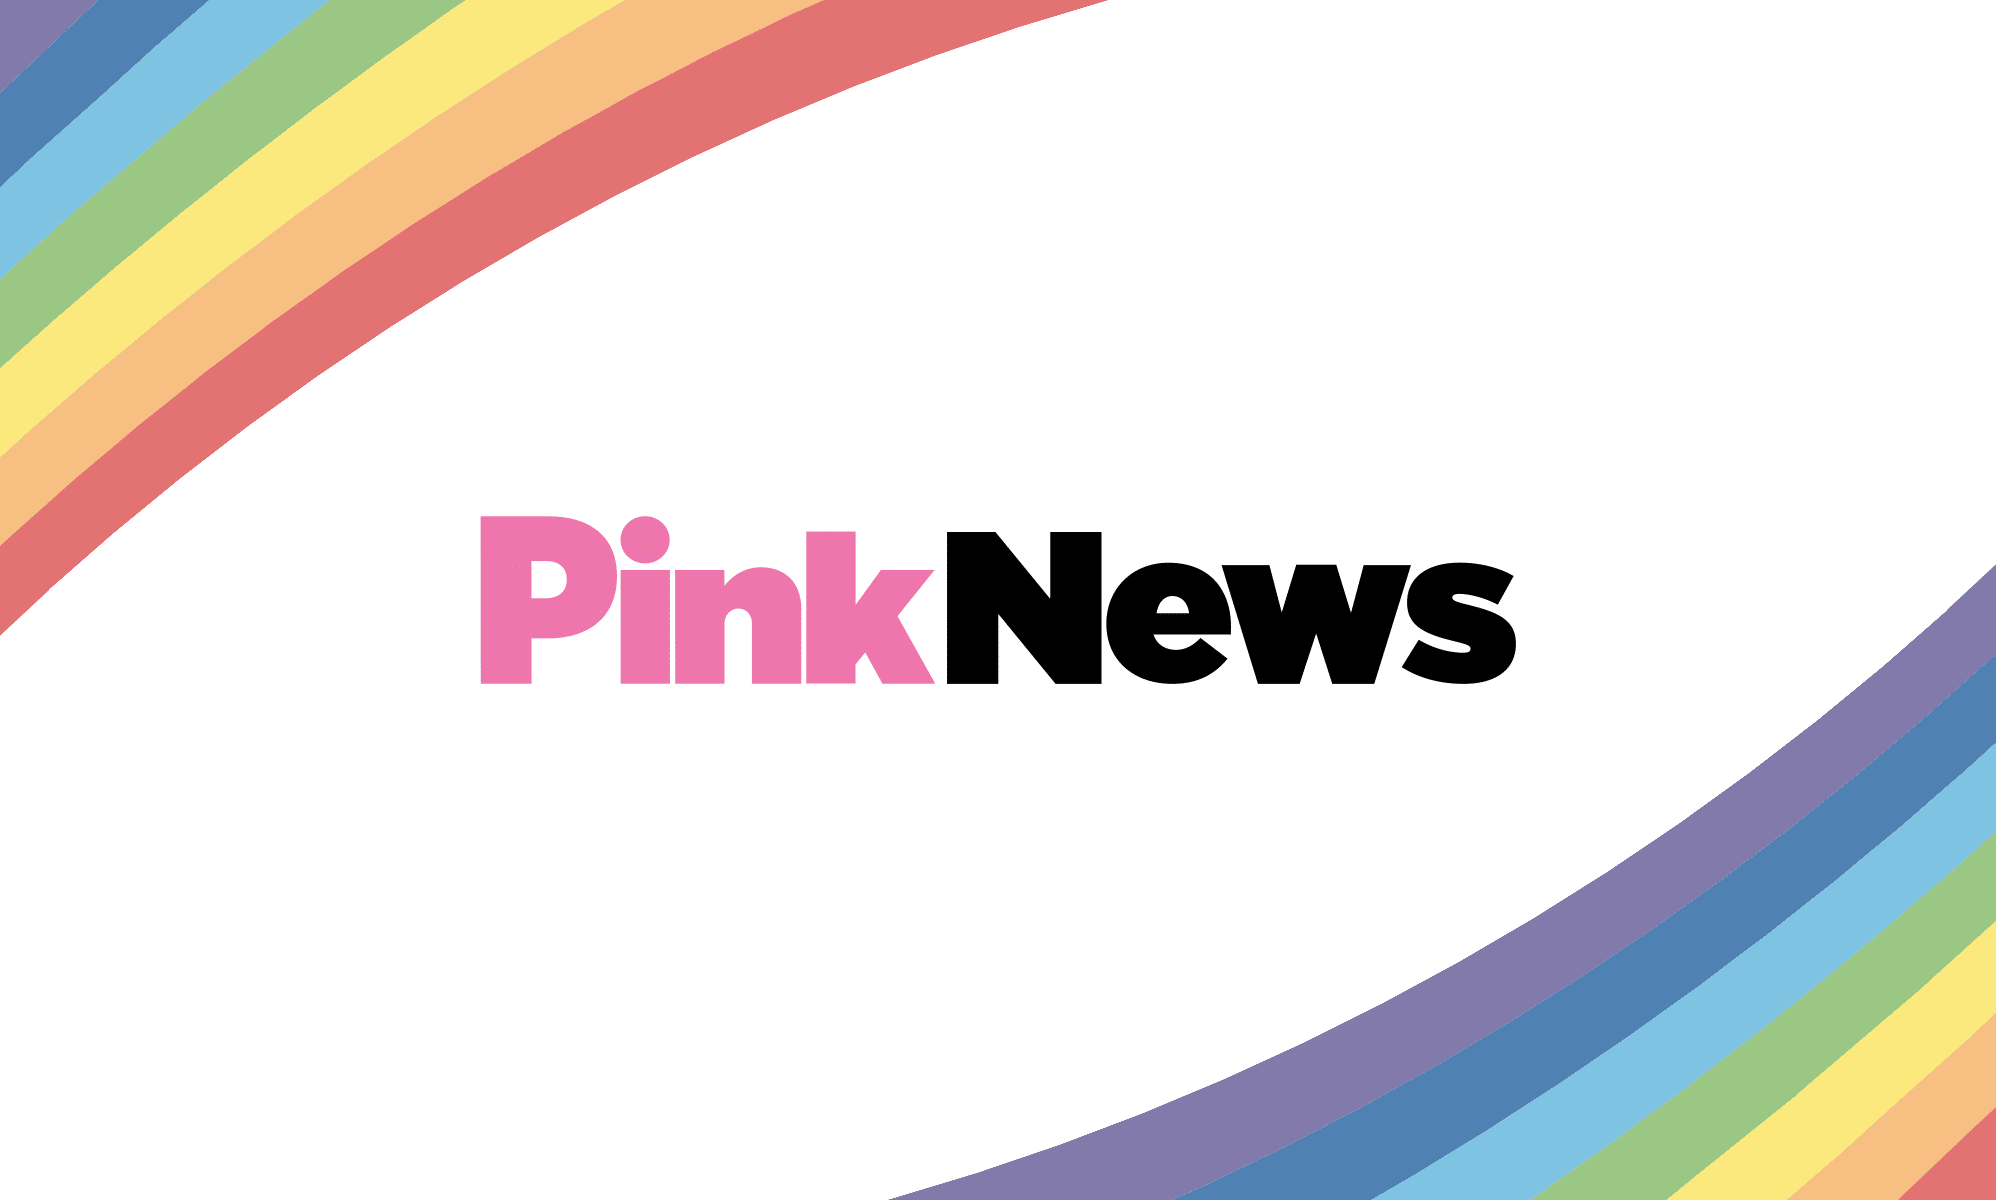 Canadian Prime Minister takes stand against homophobic bullying for &#8216;Pink Shirt Day&#8217;